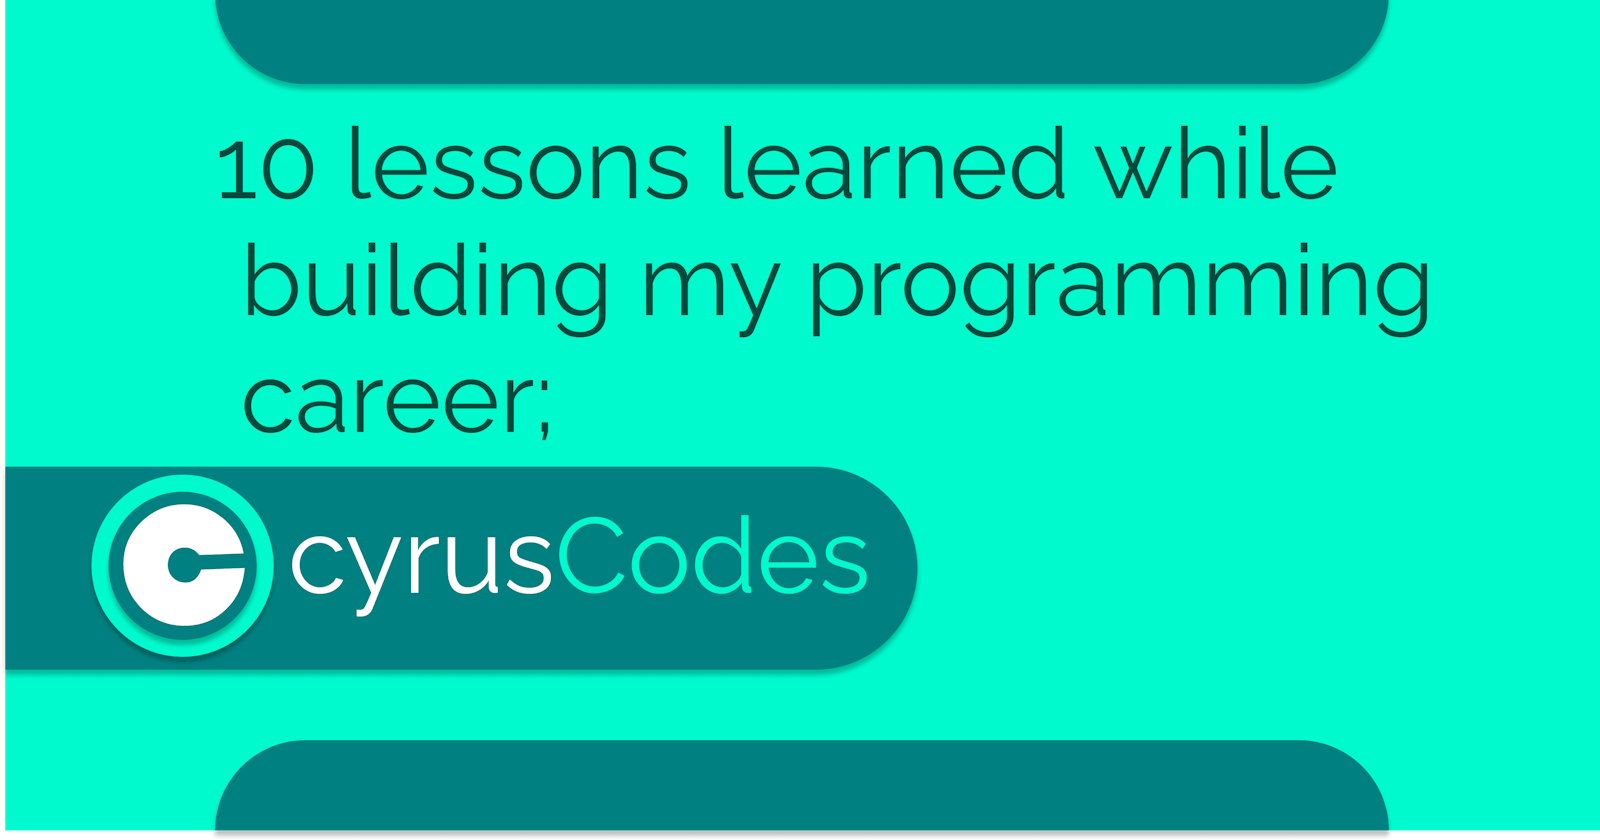 10 lessons learned while building my programming career;